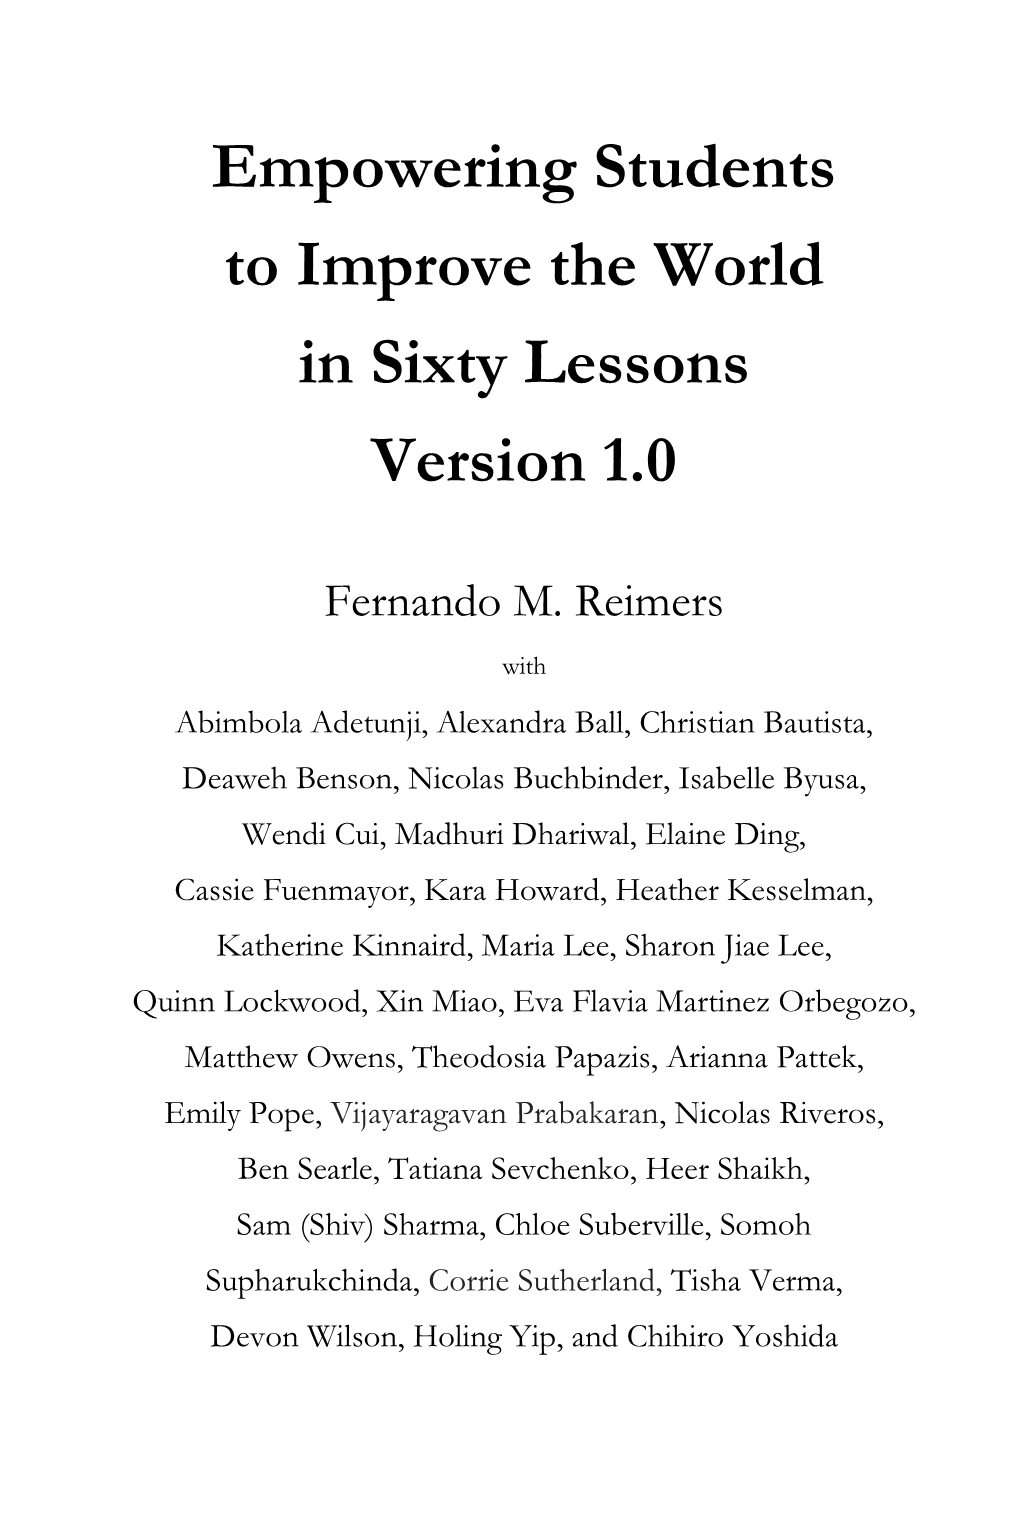 Empowering Students to Improve the World in Sixty Lessons Version 1.0